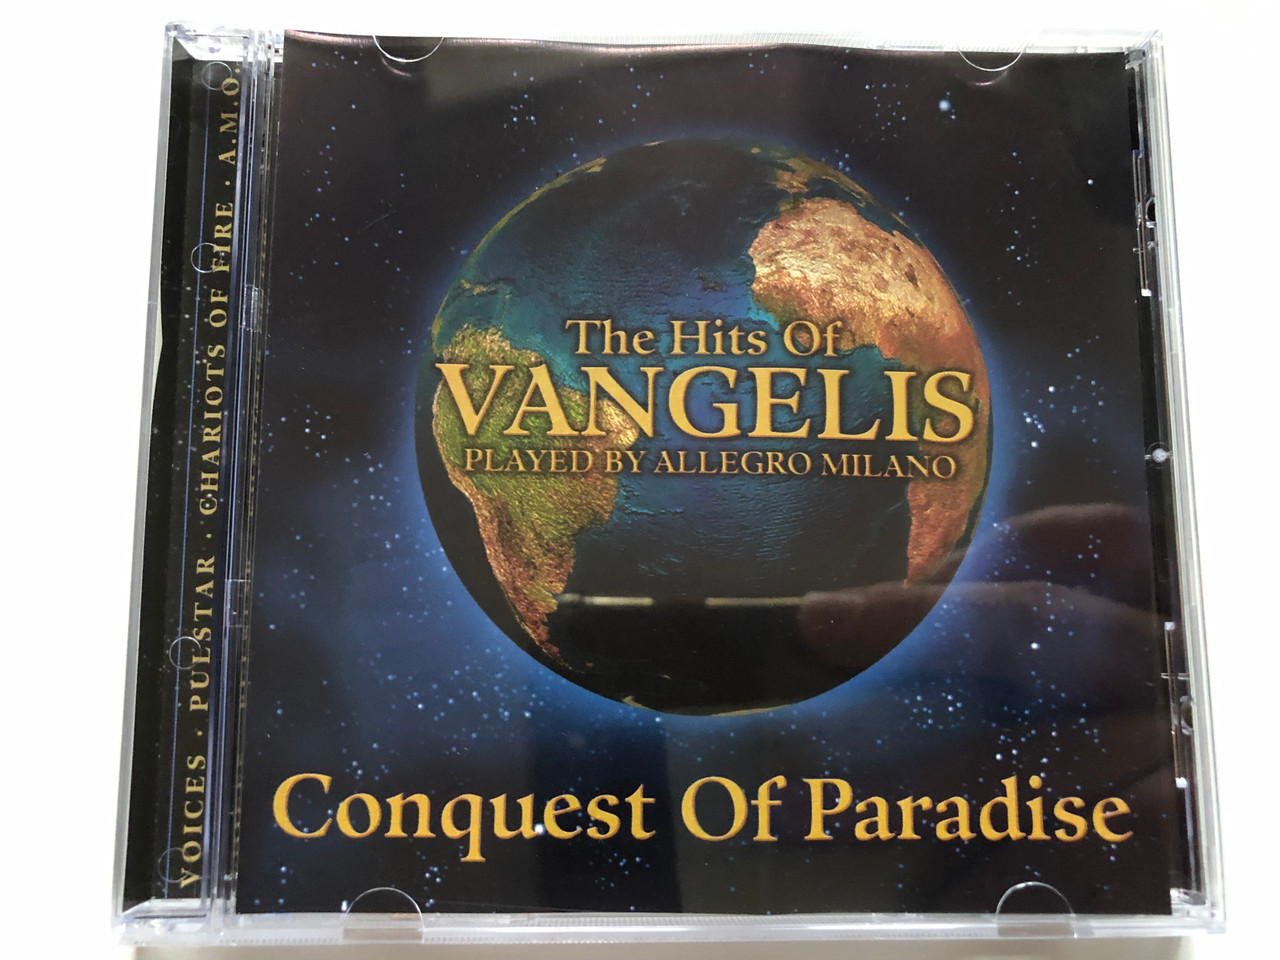 The Hits Of Vangelis Played By Allegro Milano - Conquest Of Paradise /  Eurotrend Audio CD / CD 152.360 - bibleinmylanguage